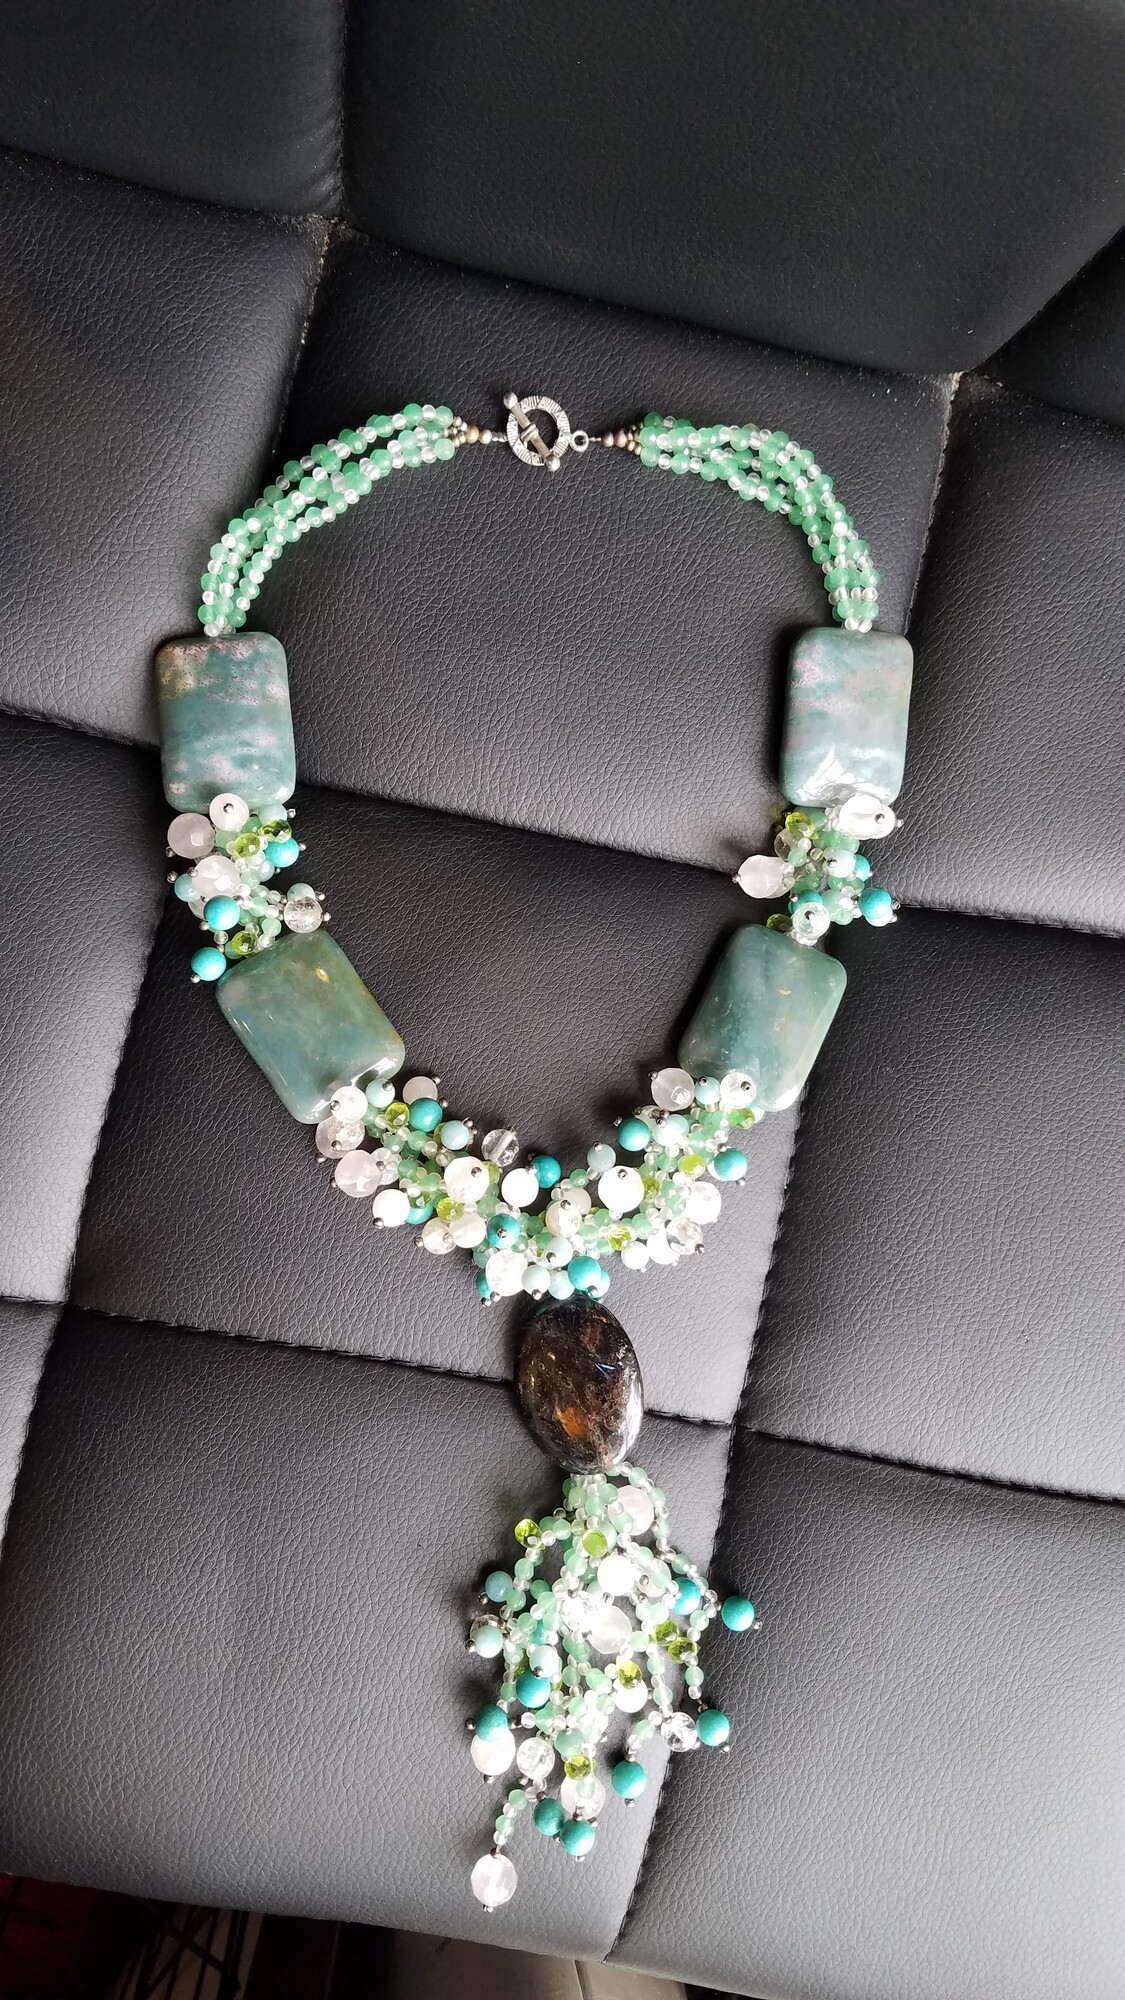 Stunning Custom Necklace of Green Agate, Rose Quartz, Peridot and Turquoise Beads.
21 inches long and weighs 241 grams
The rectangular Green Agate measures 1.5 inches X 1 inches
The Dark Oval Agate measures 1.5 inches X 1 inches
A true ONE OF A KIND